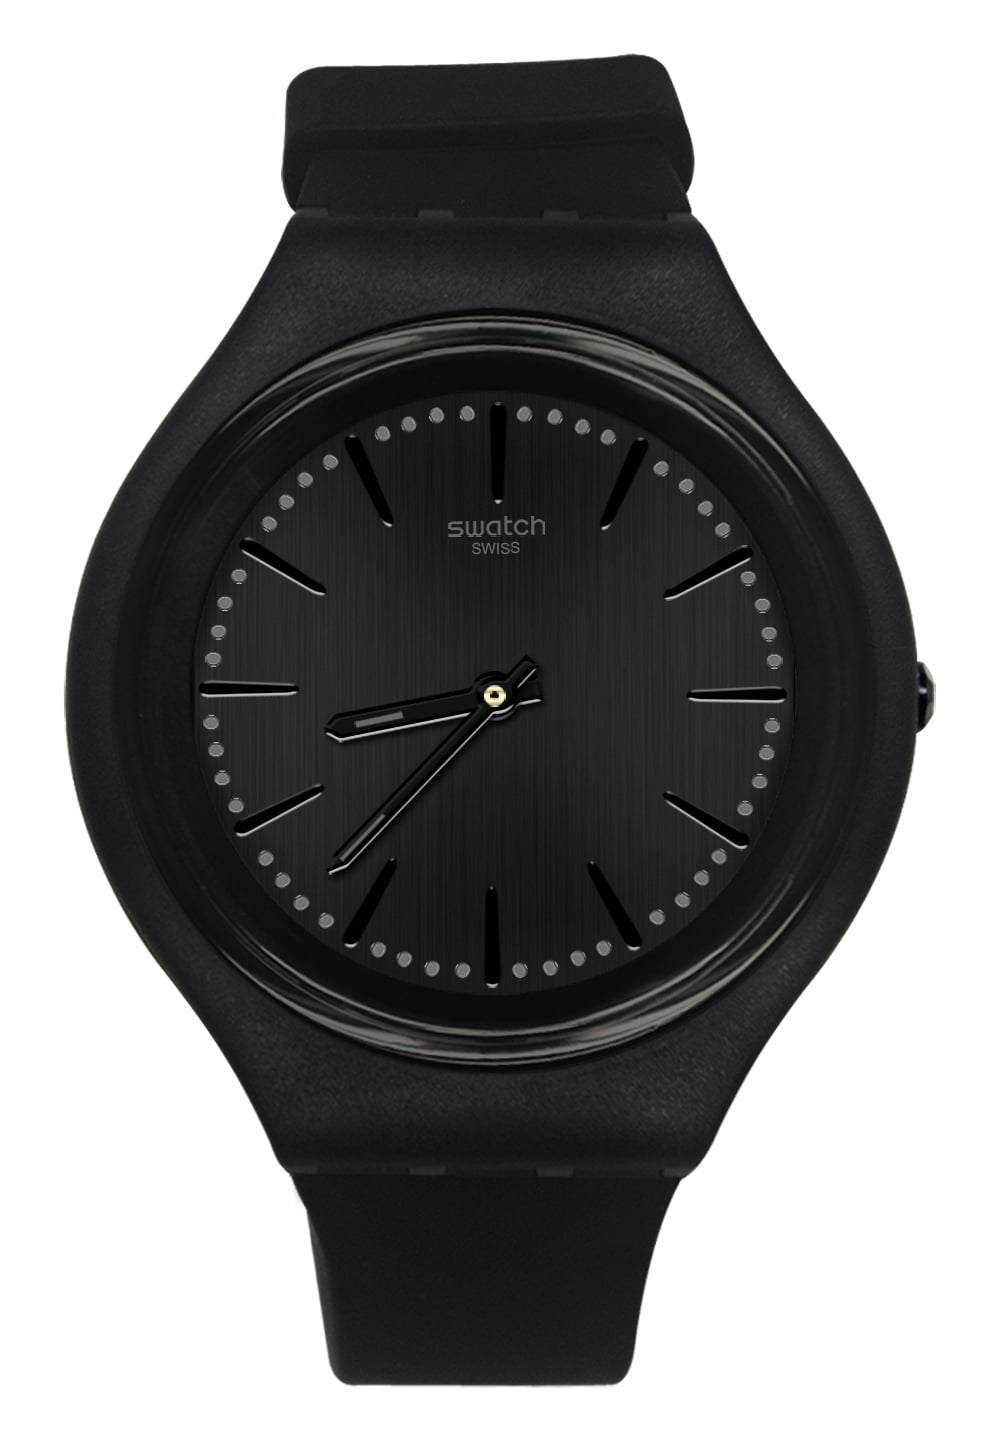 Swatch SVUB103 Skinclass Black Sun-Brushed Analog Dial Rubber Band Skin ...